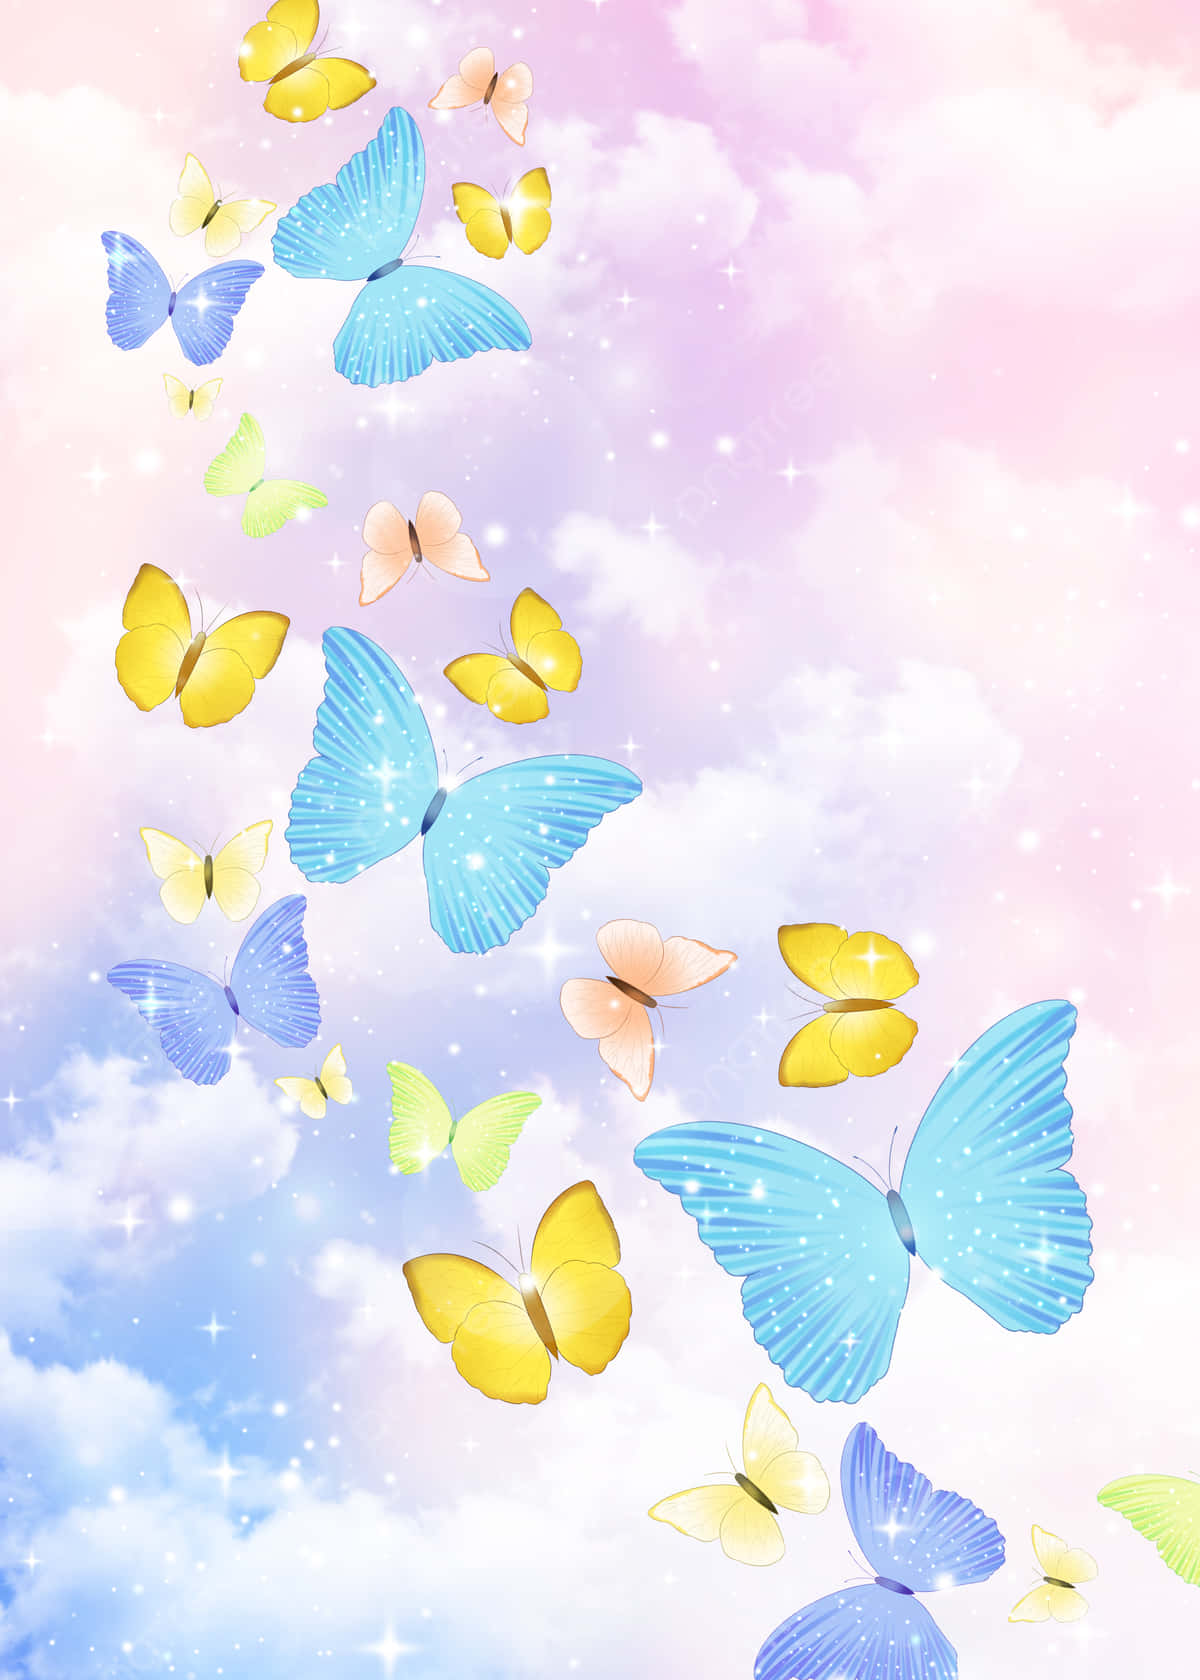 a colorful butterfly flying in the sky